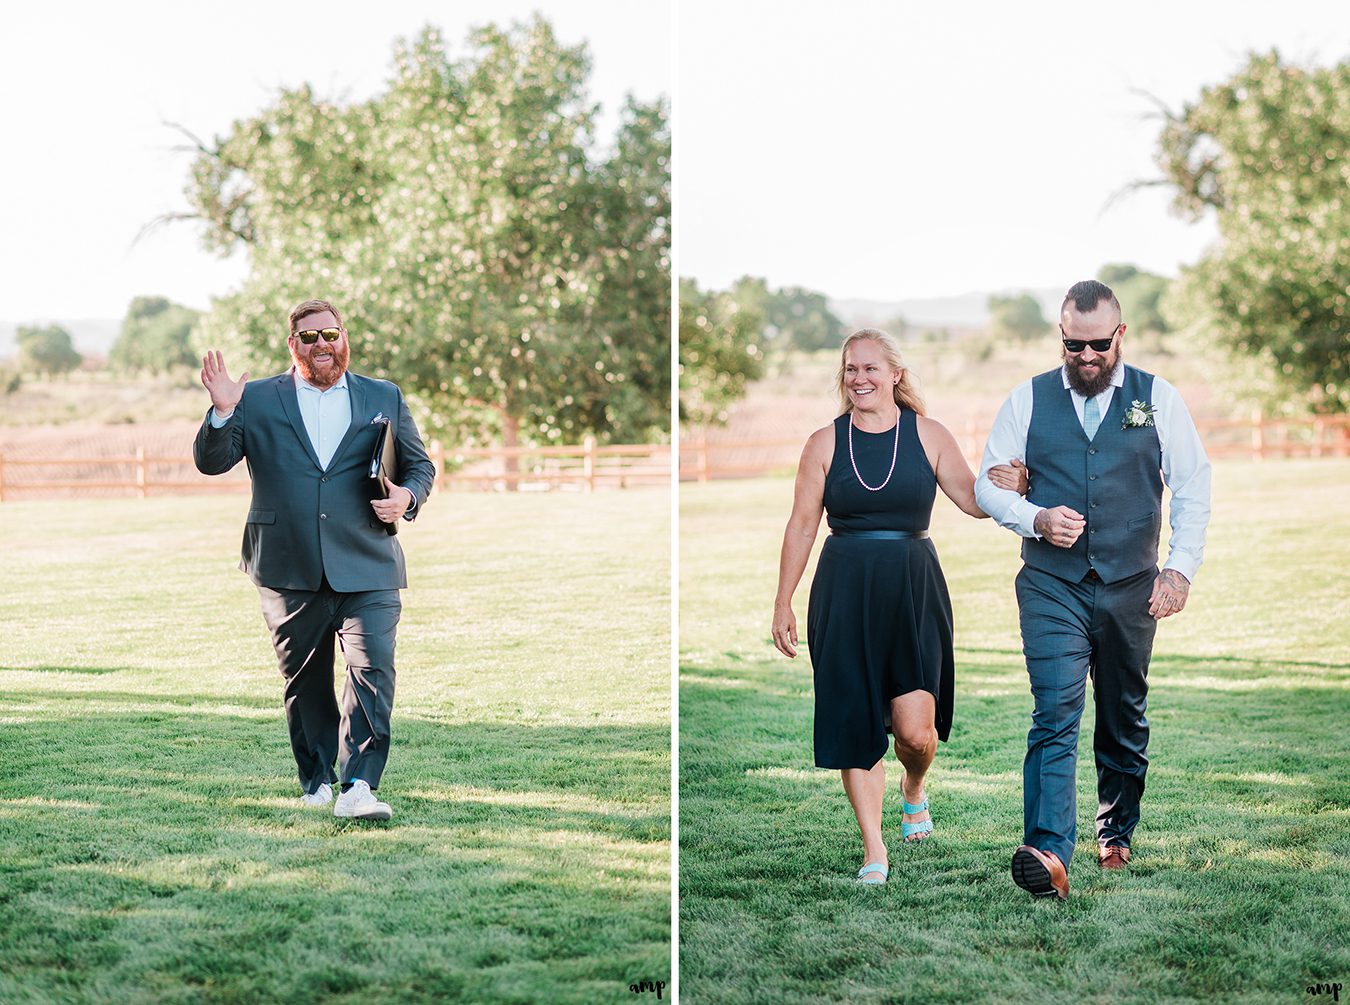 Derek the officiant and Dustin with his mom walking down the aisle | Grand Junction Backyard Wedding | amanda.matilda.photography